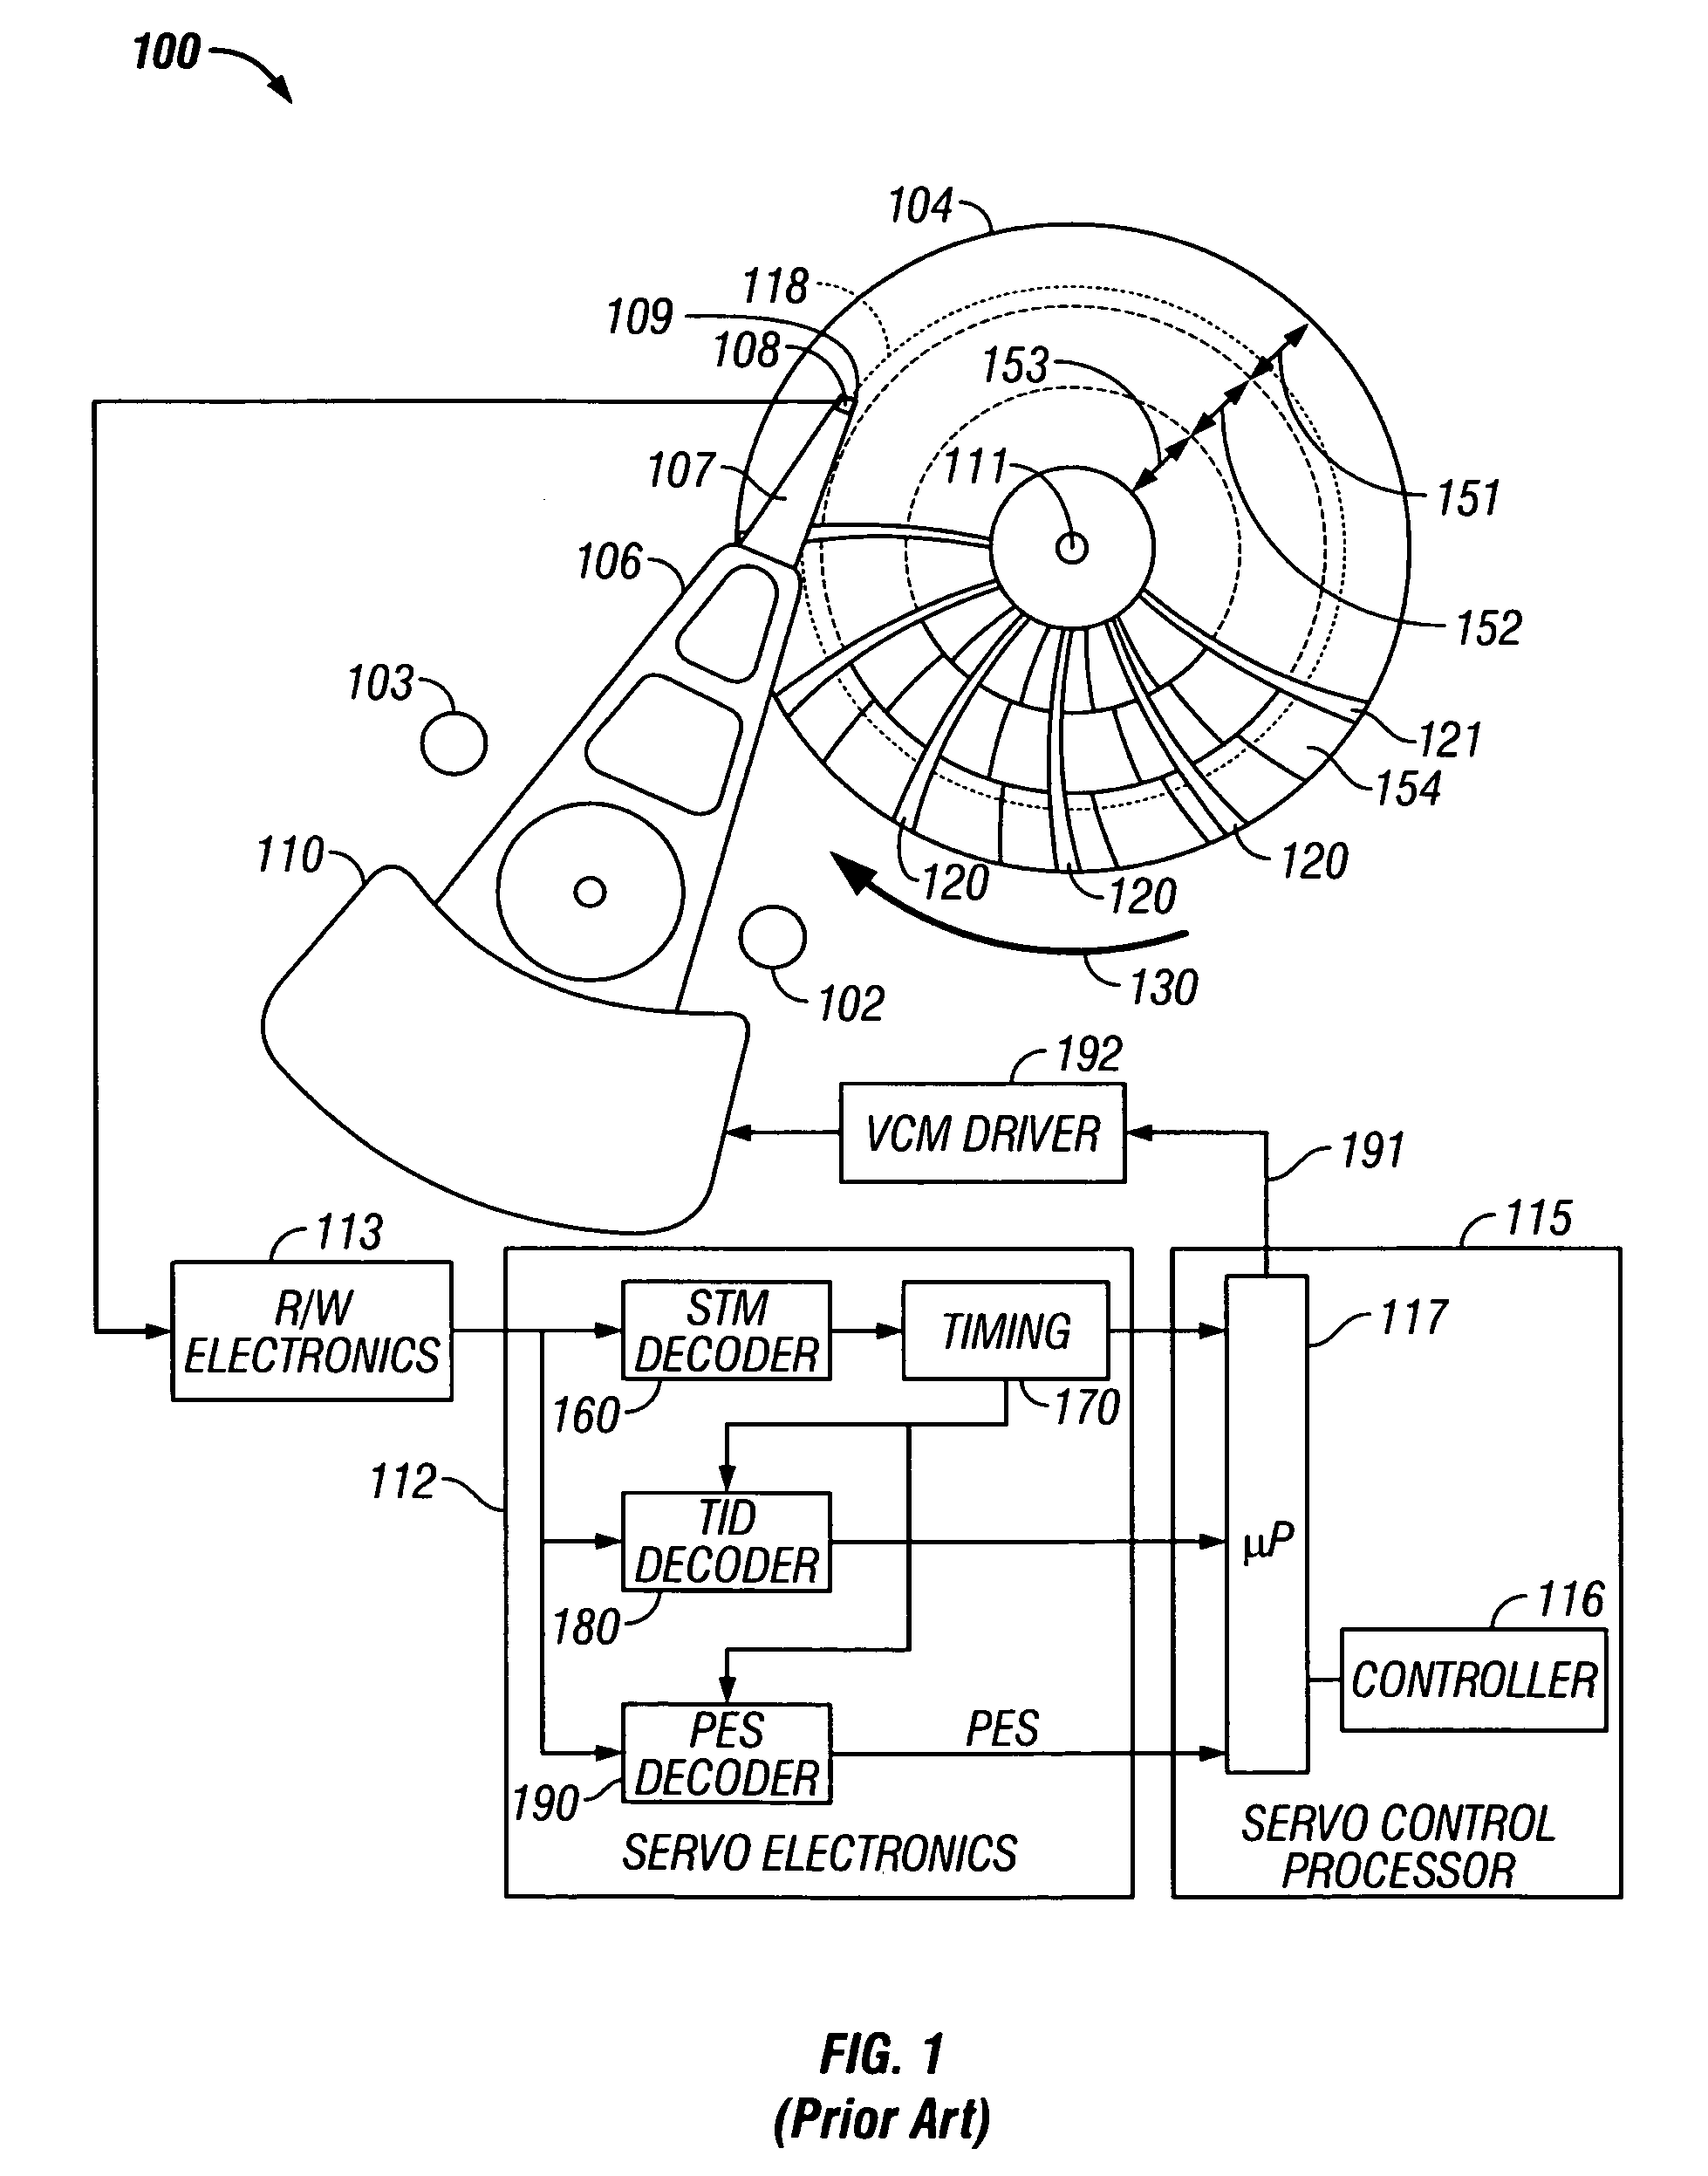 Disk drive with a dual-stage actuator and failure detection and recovery system for the secondary actuator